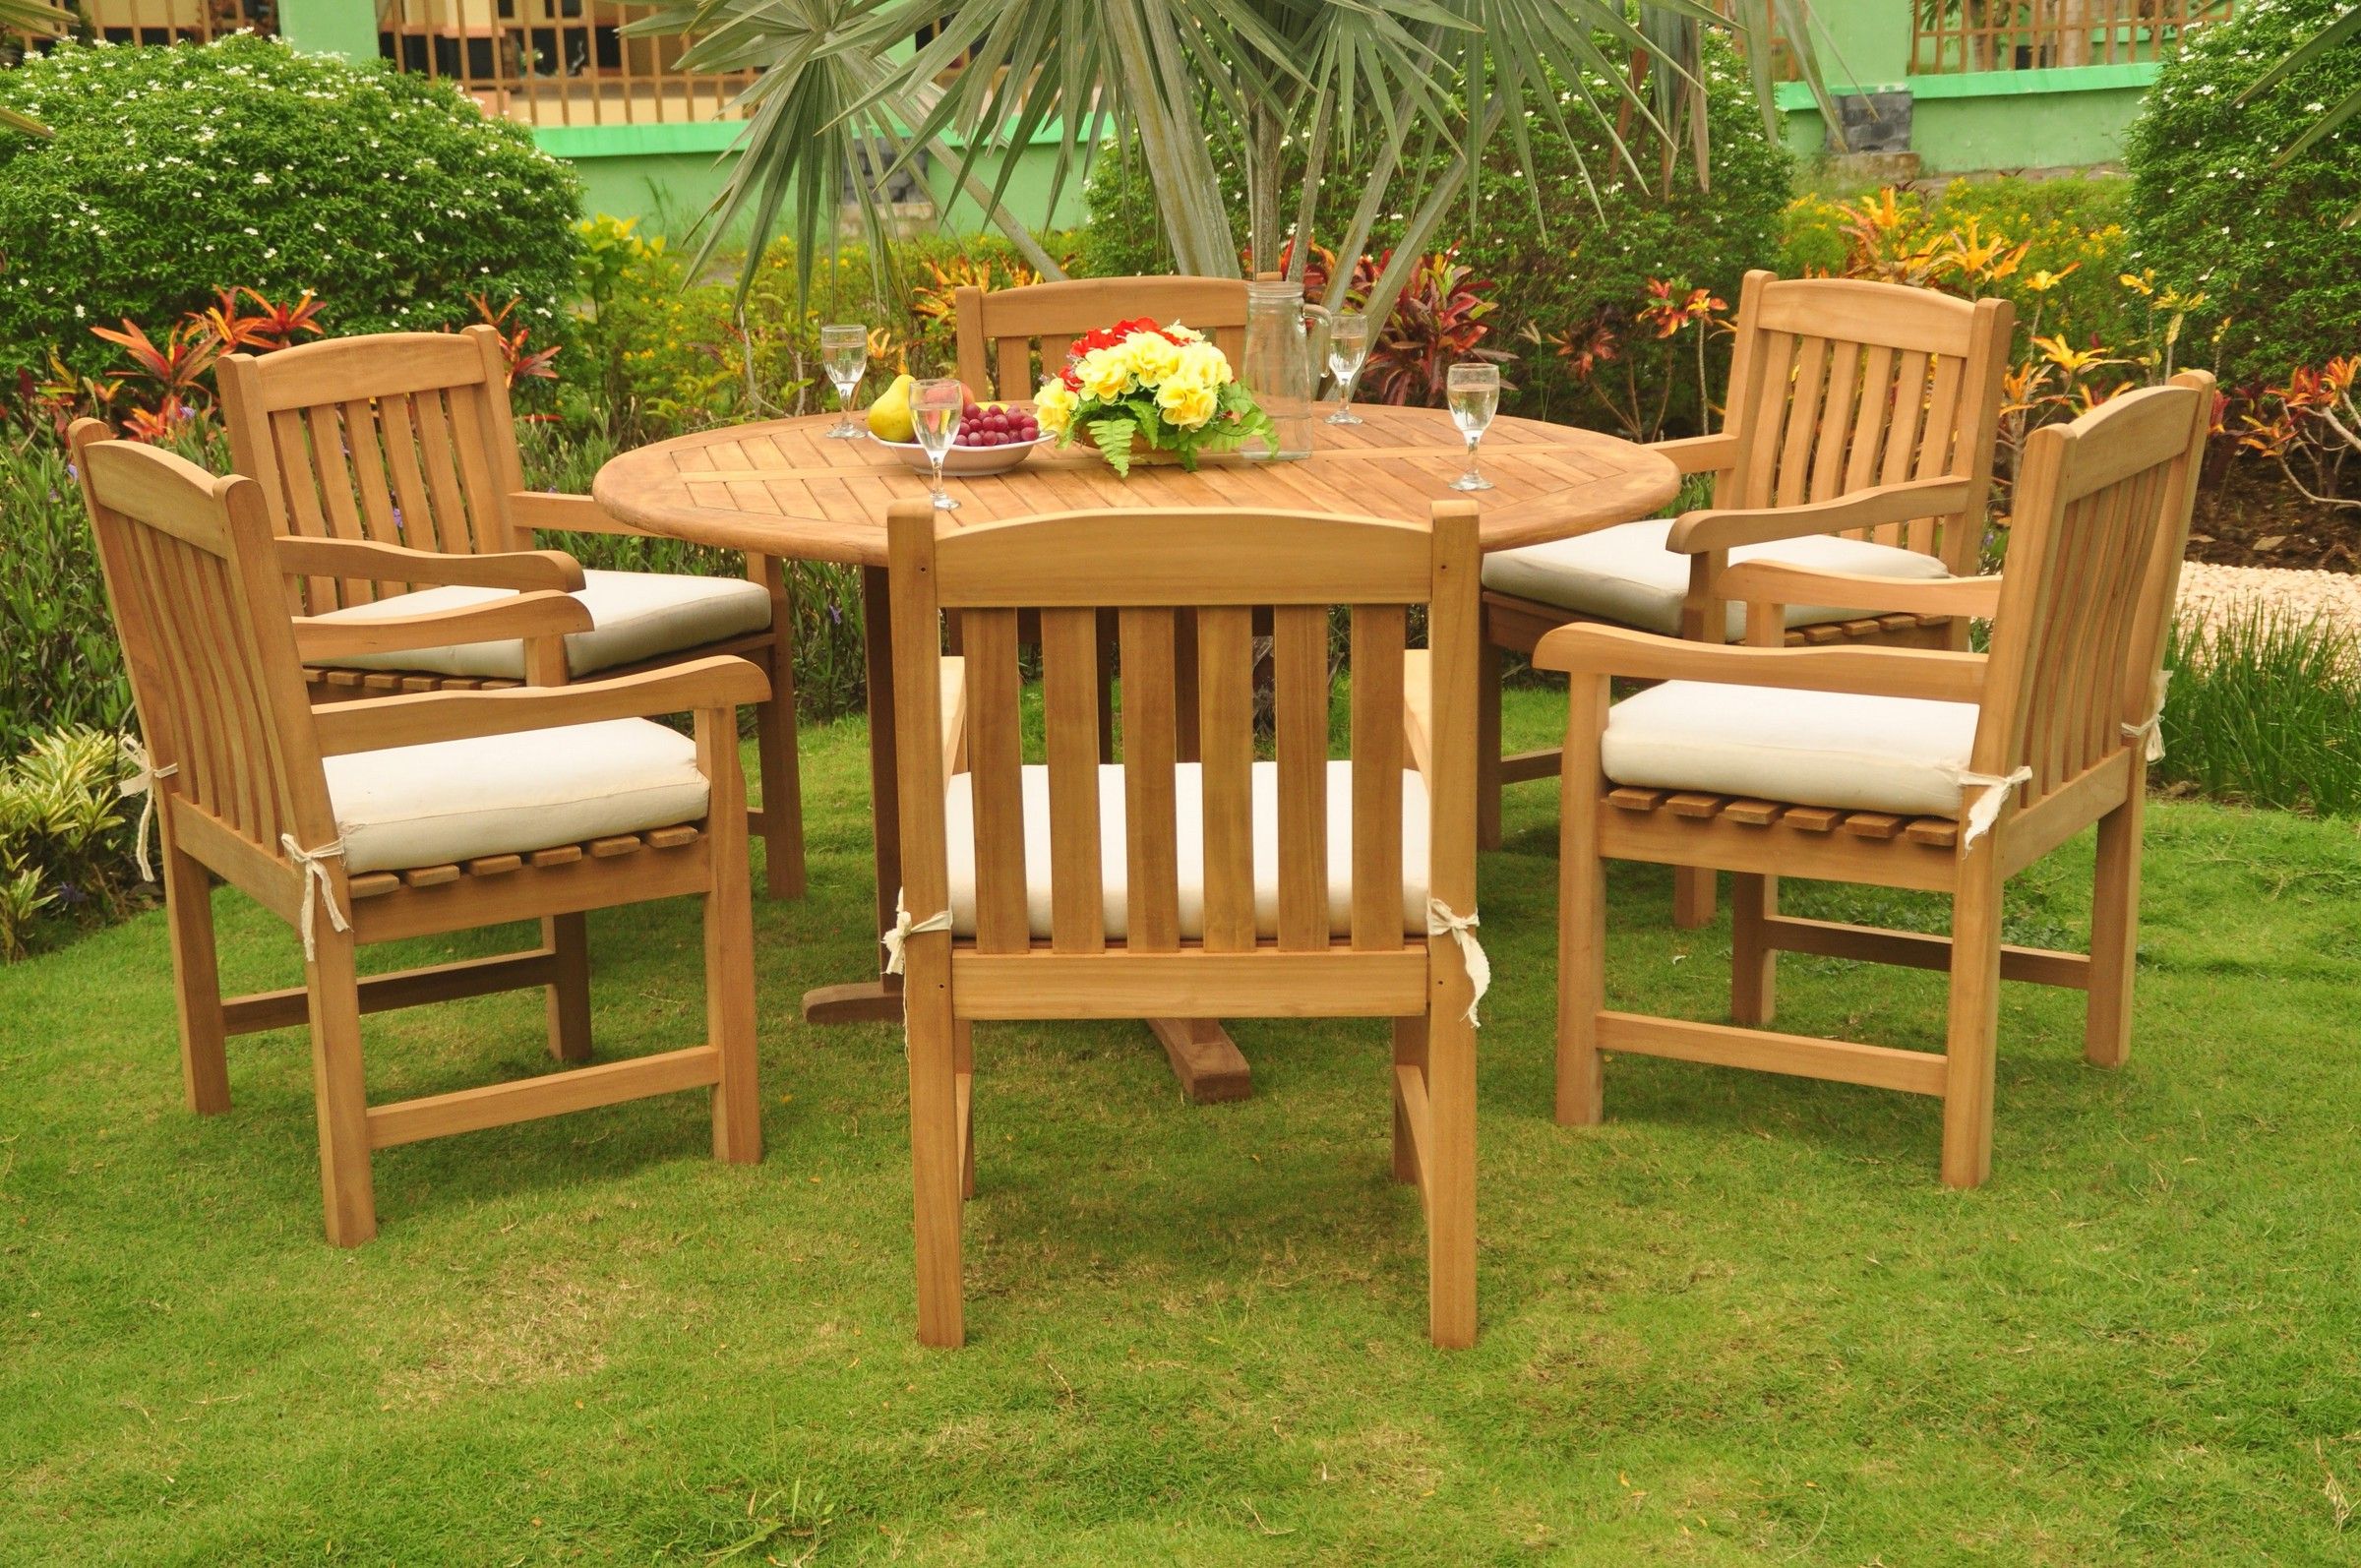 Most Popular Teak Armchair Round Patio Dining Sets Within Teak Dining Set: 6 Seater 7 Pc: 60" Round Dining Table And 6 Devon Arm (View 1 of 15)